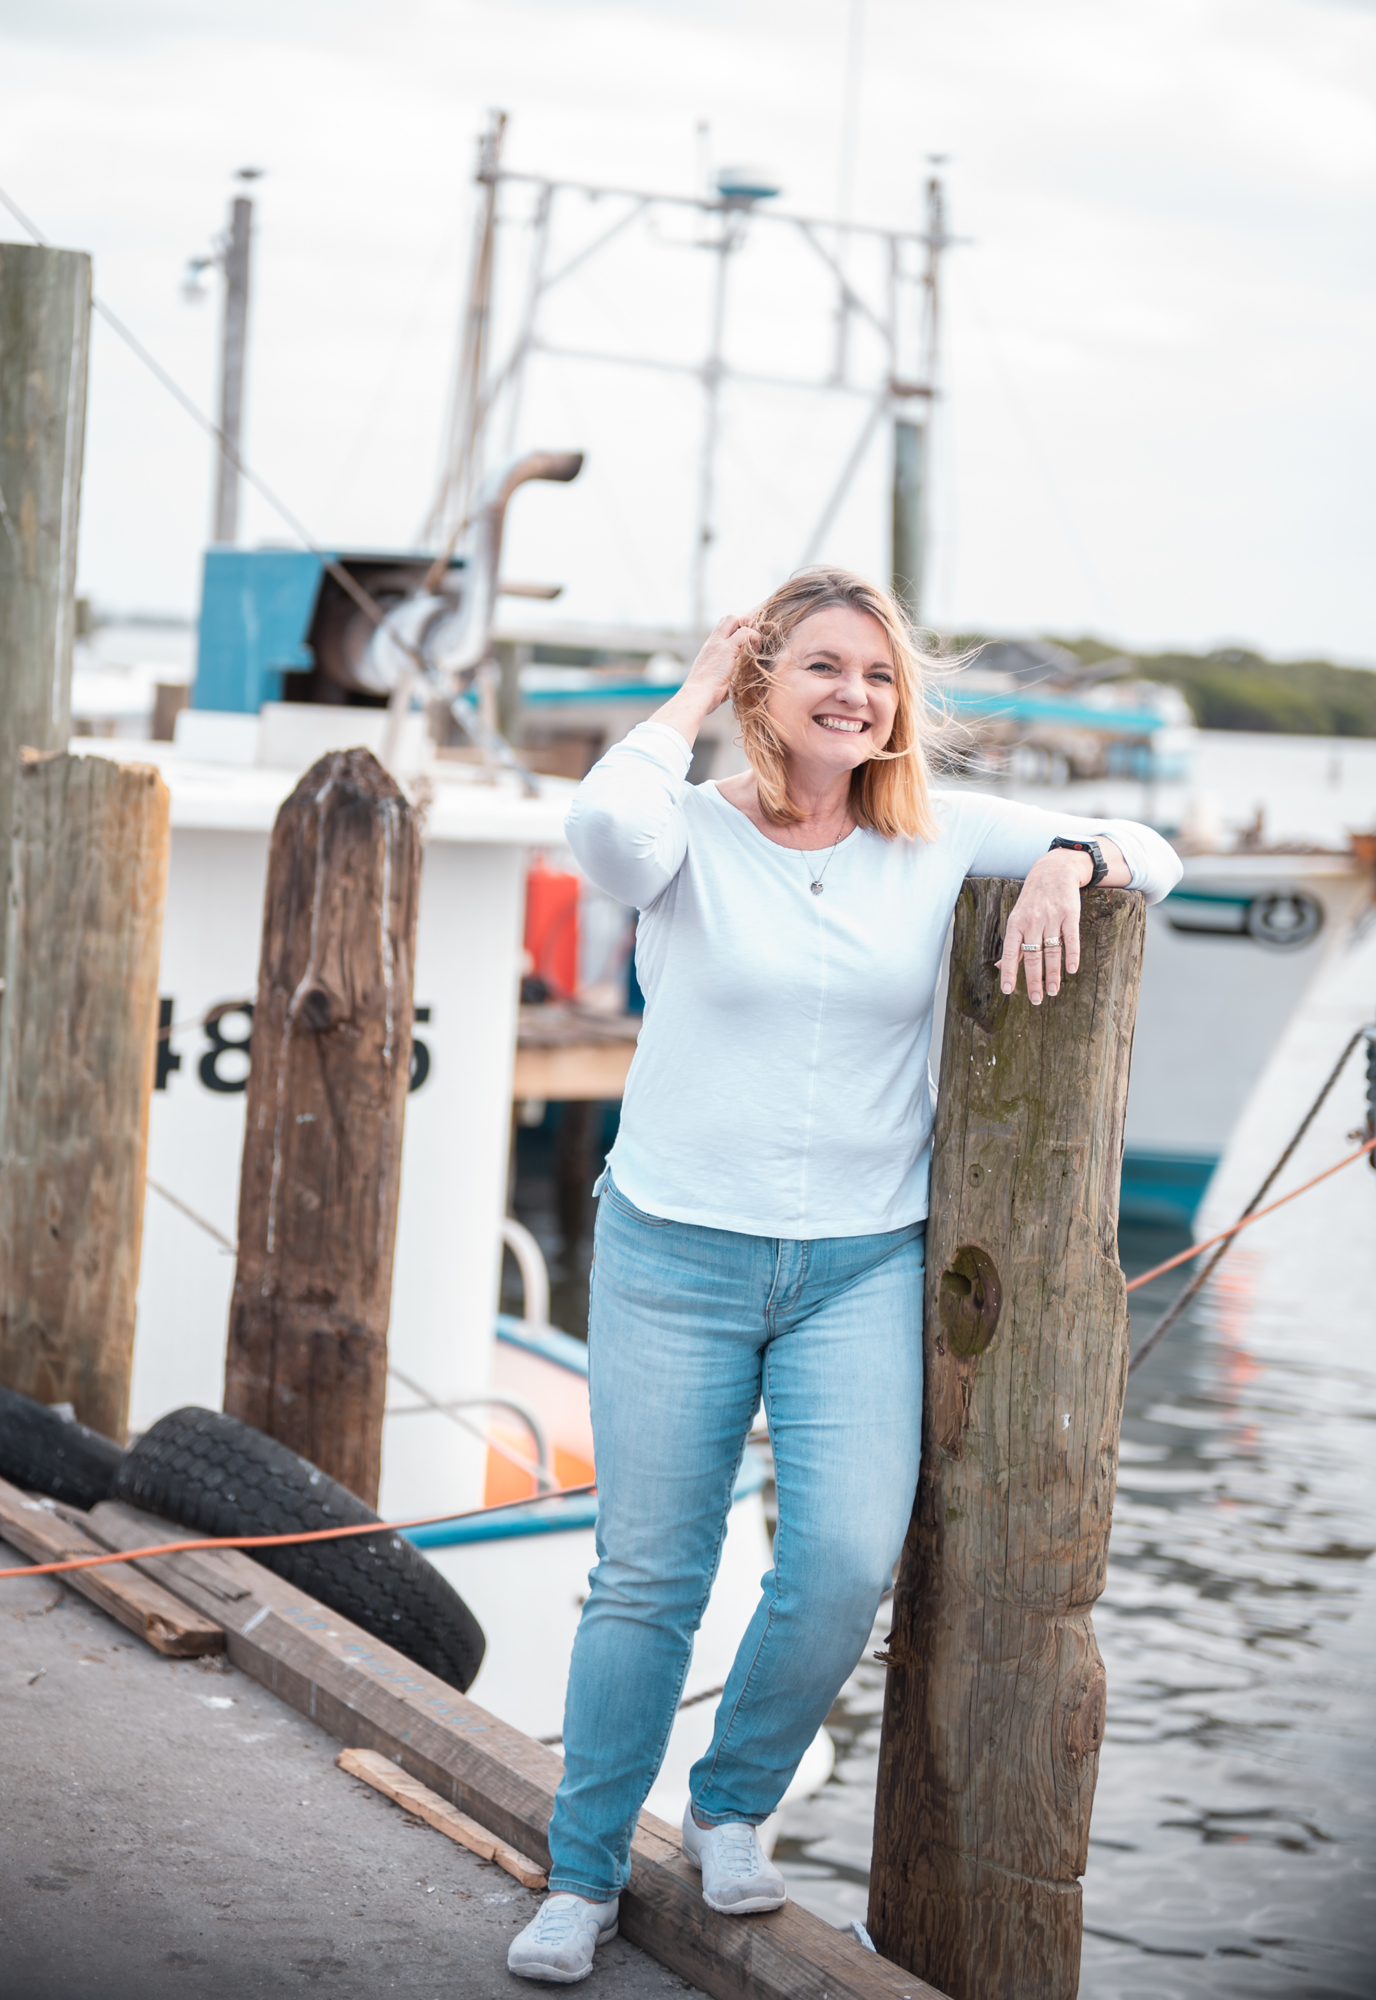 Karen Bell, a third-generation Cortez native and the owner of A.P. Bell Fish Co., which operates 13 fishing boats. A.P. Bell ships seafood internationally and supplies it to several local restaurants.